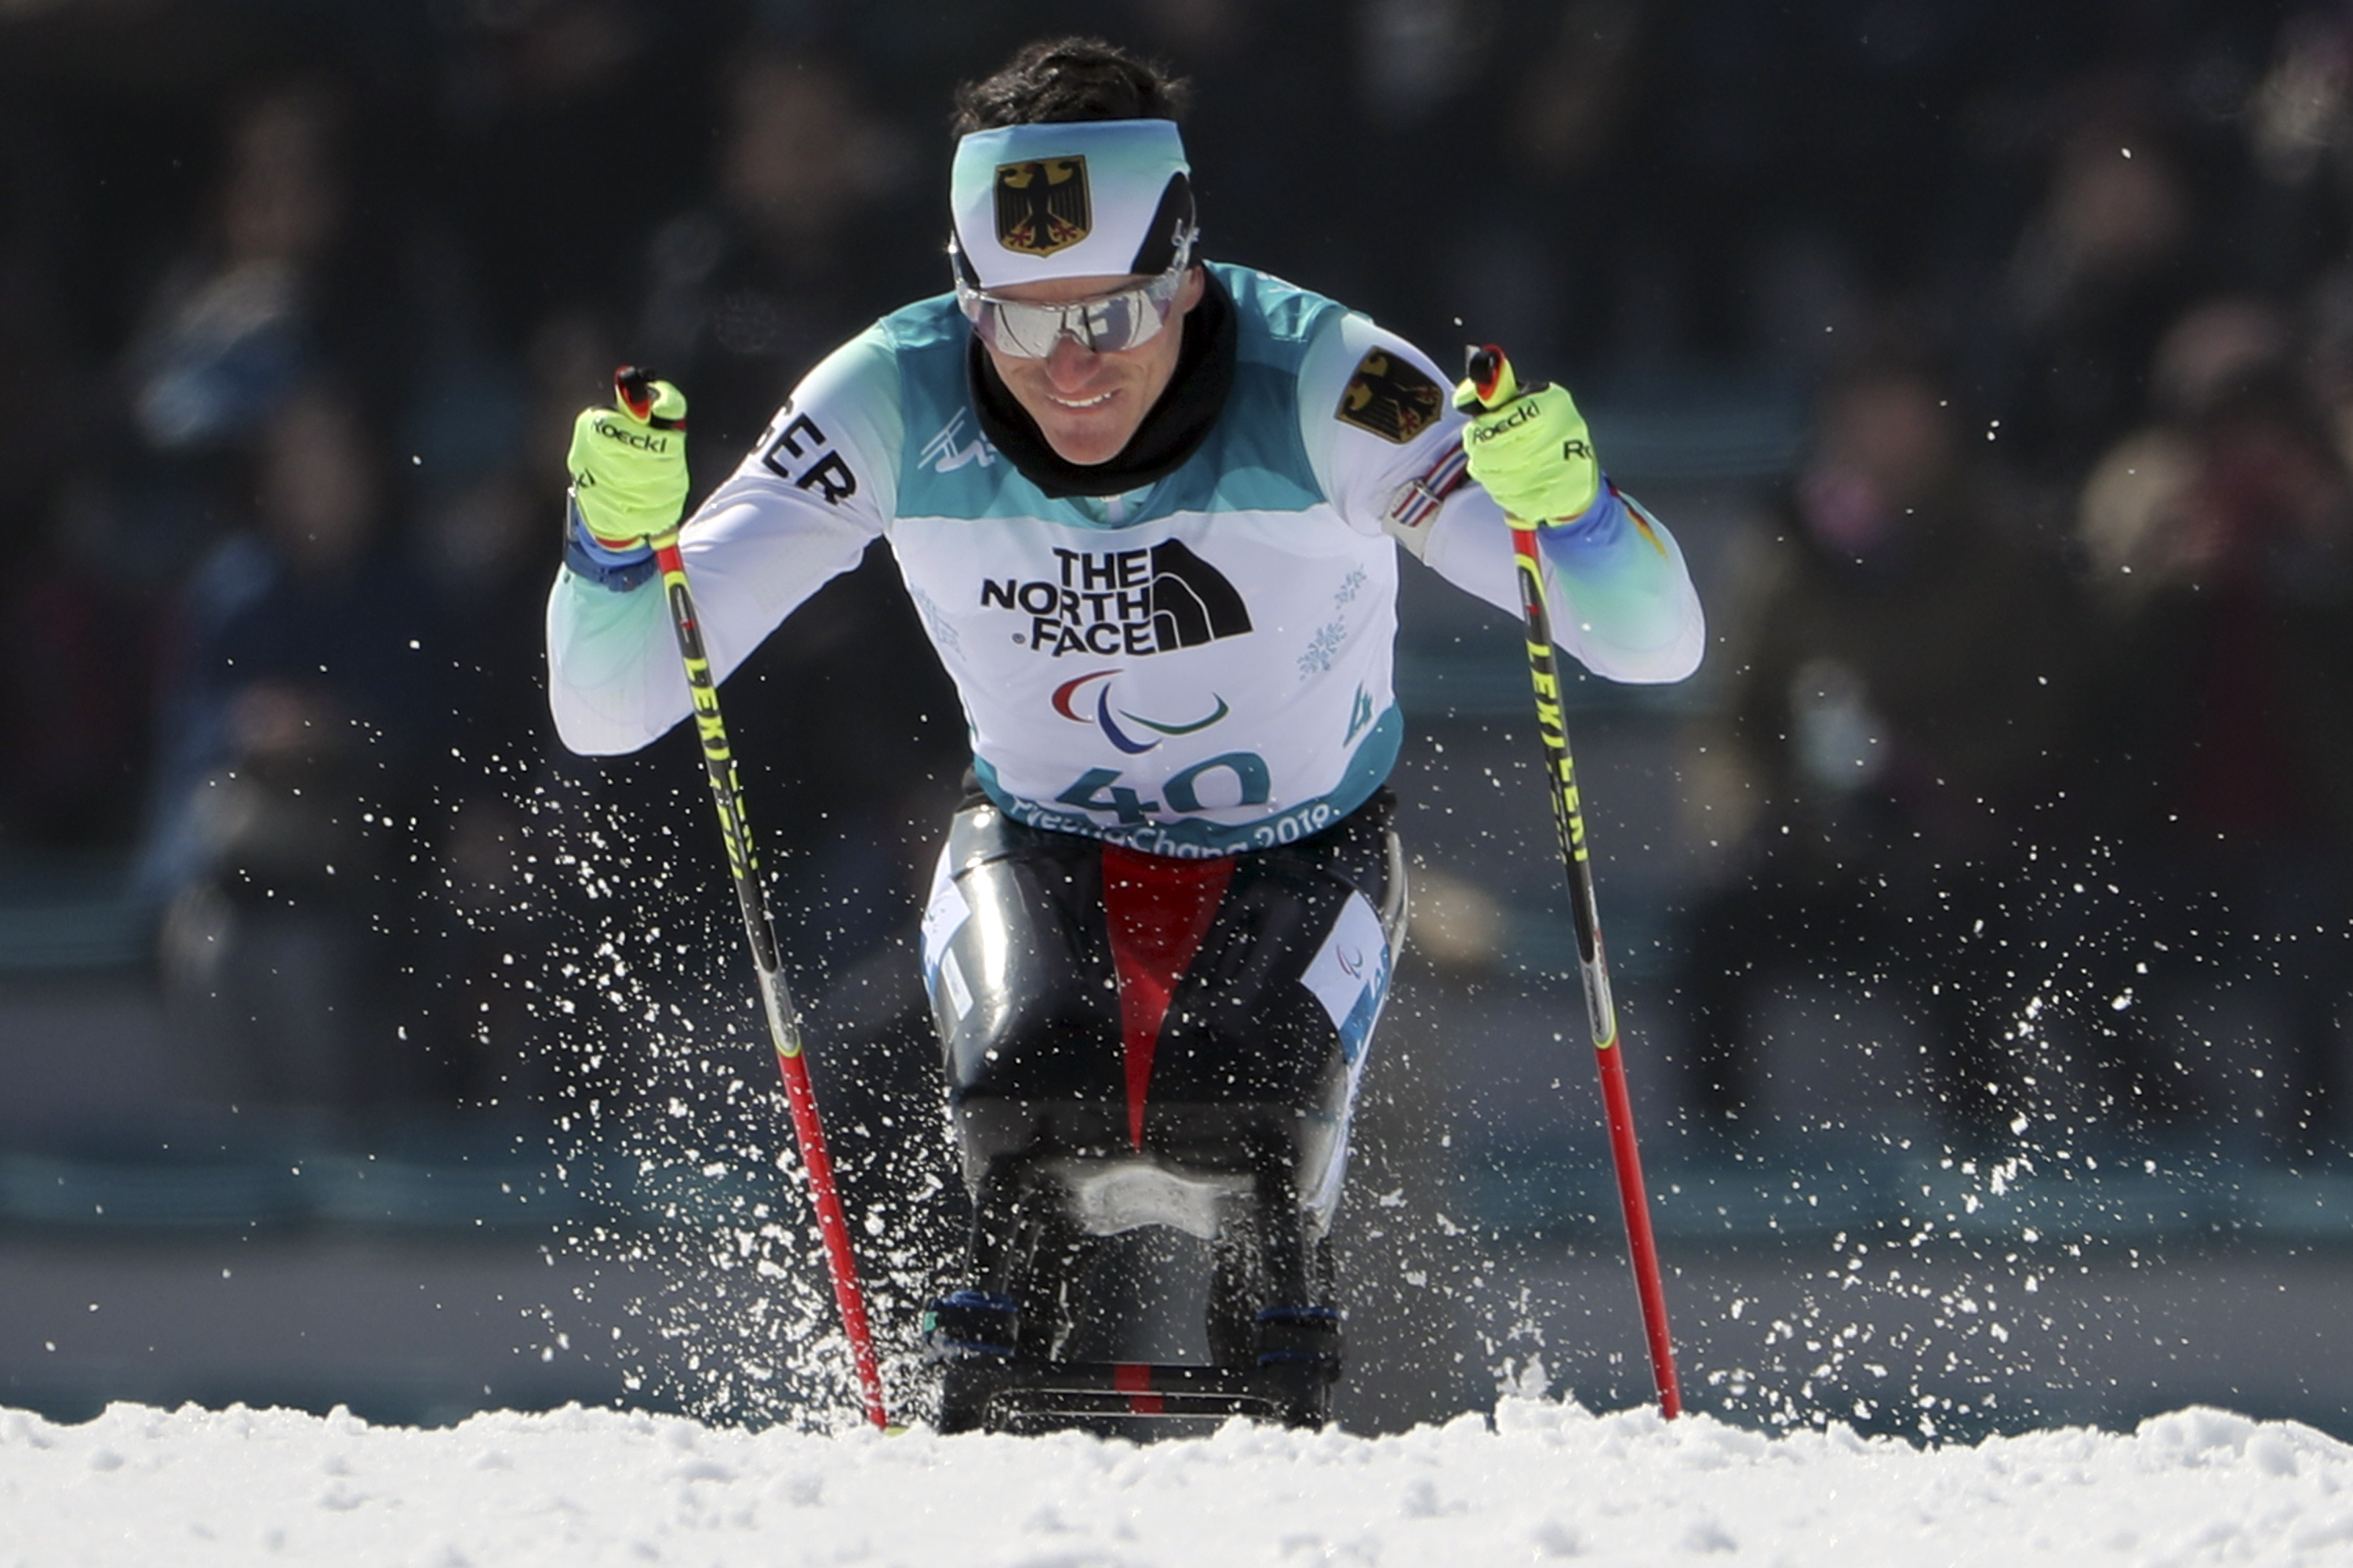 Martin Fleig of Germany competes in the Biathlon Sitting Men's 7.5km at the Alpensia Biathlon Centre during the 2018 Winter Paralympics in Pyeongchang, South Korea, Saturday, March 10, 2018. (AP Photo/Ng Han Guan)